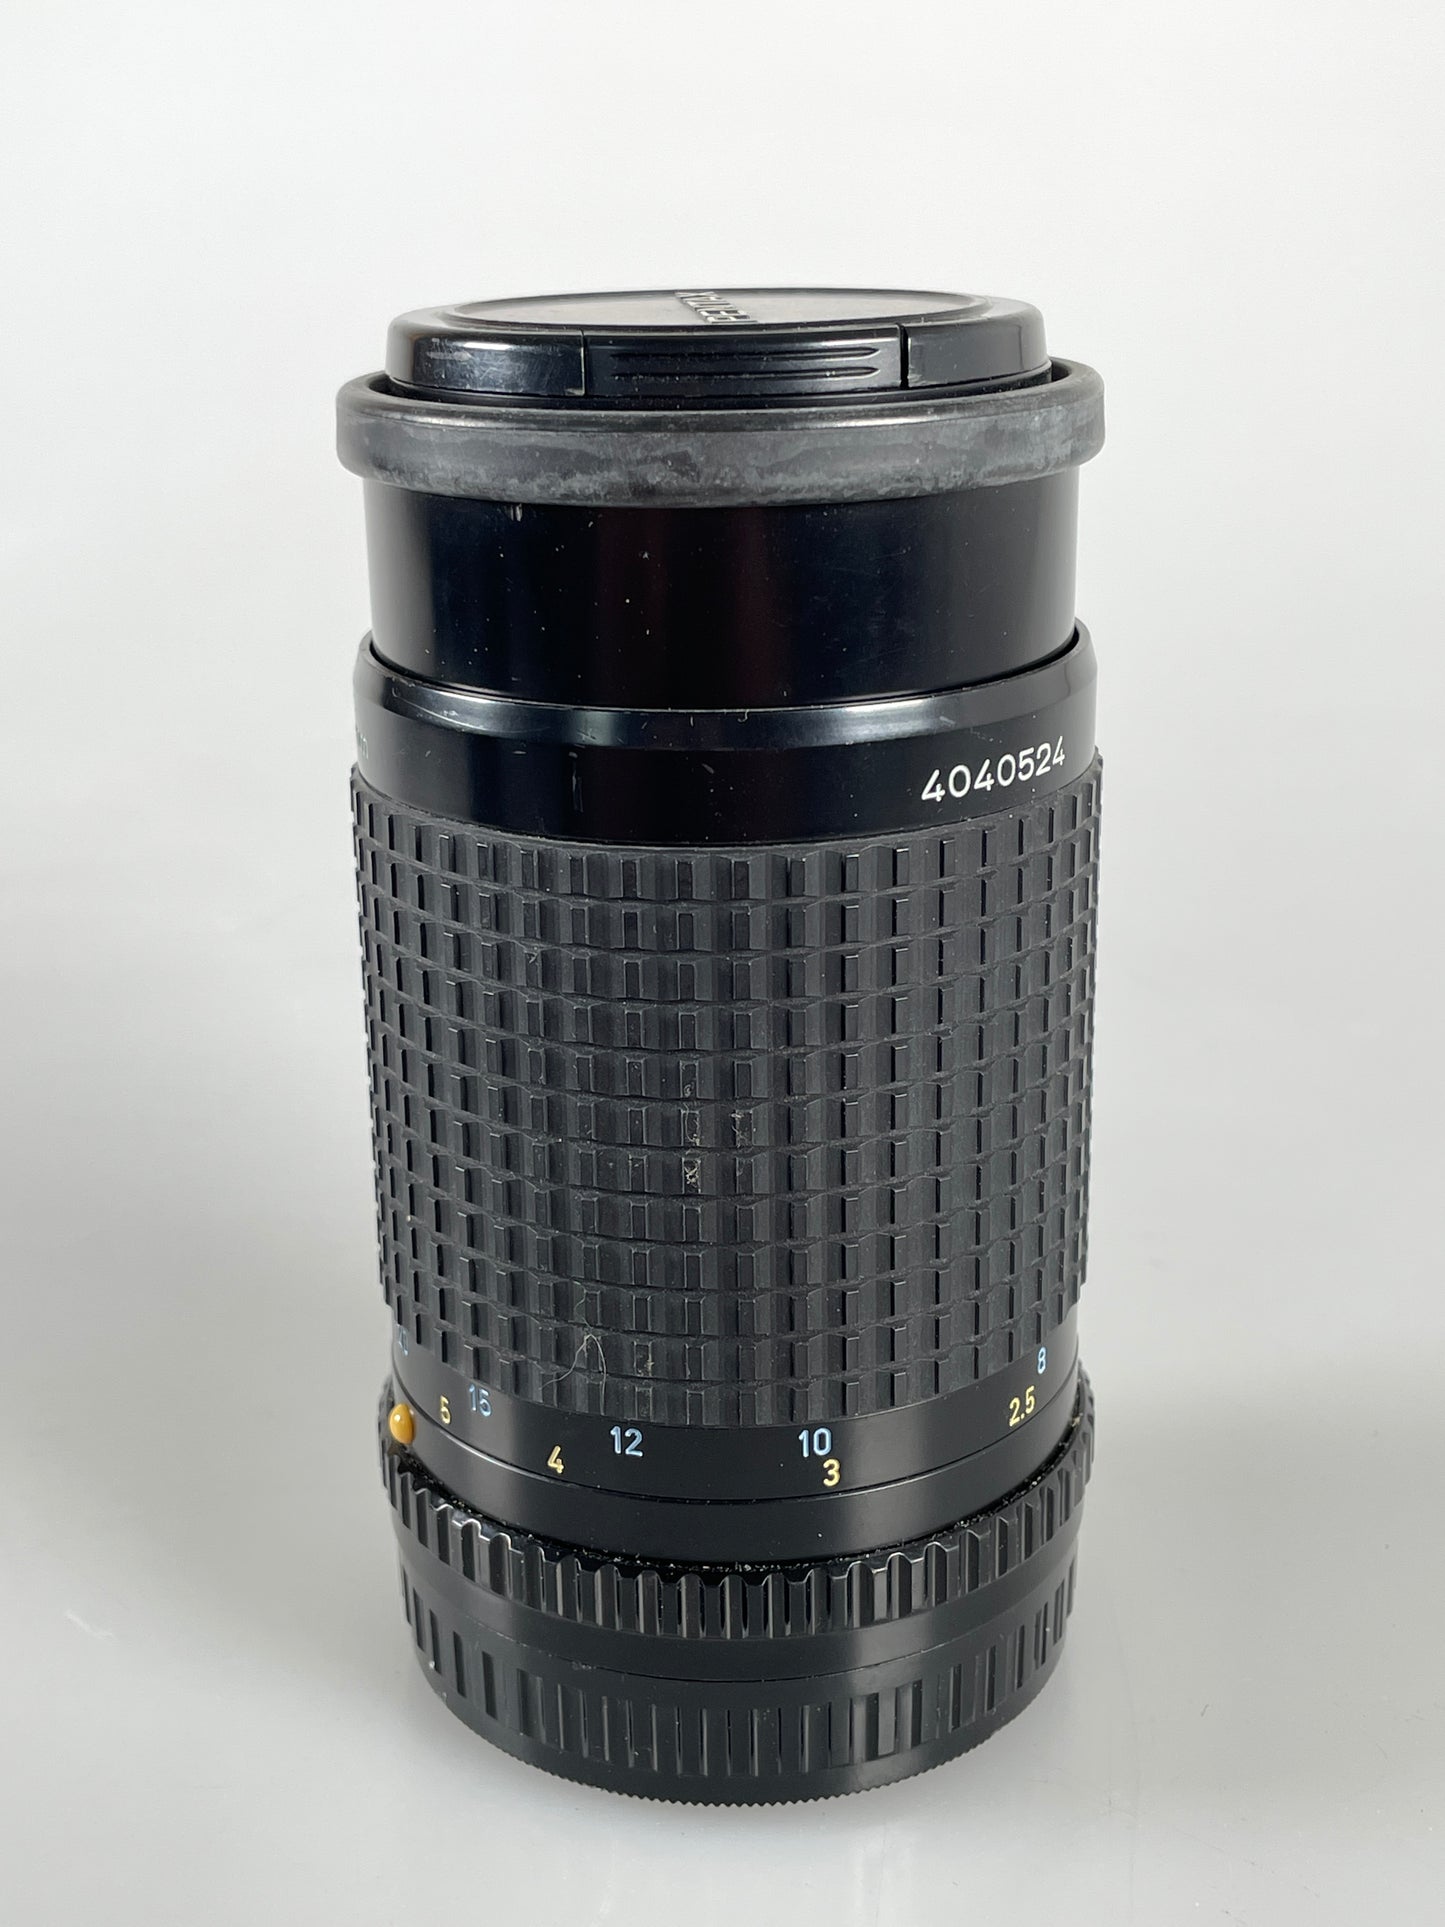 Pentax SMC A 645 200mm f4 Telephoto Lens For 645 N NII